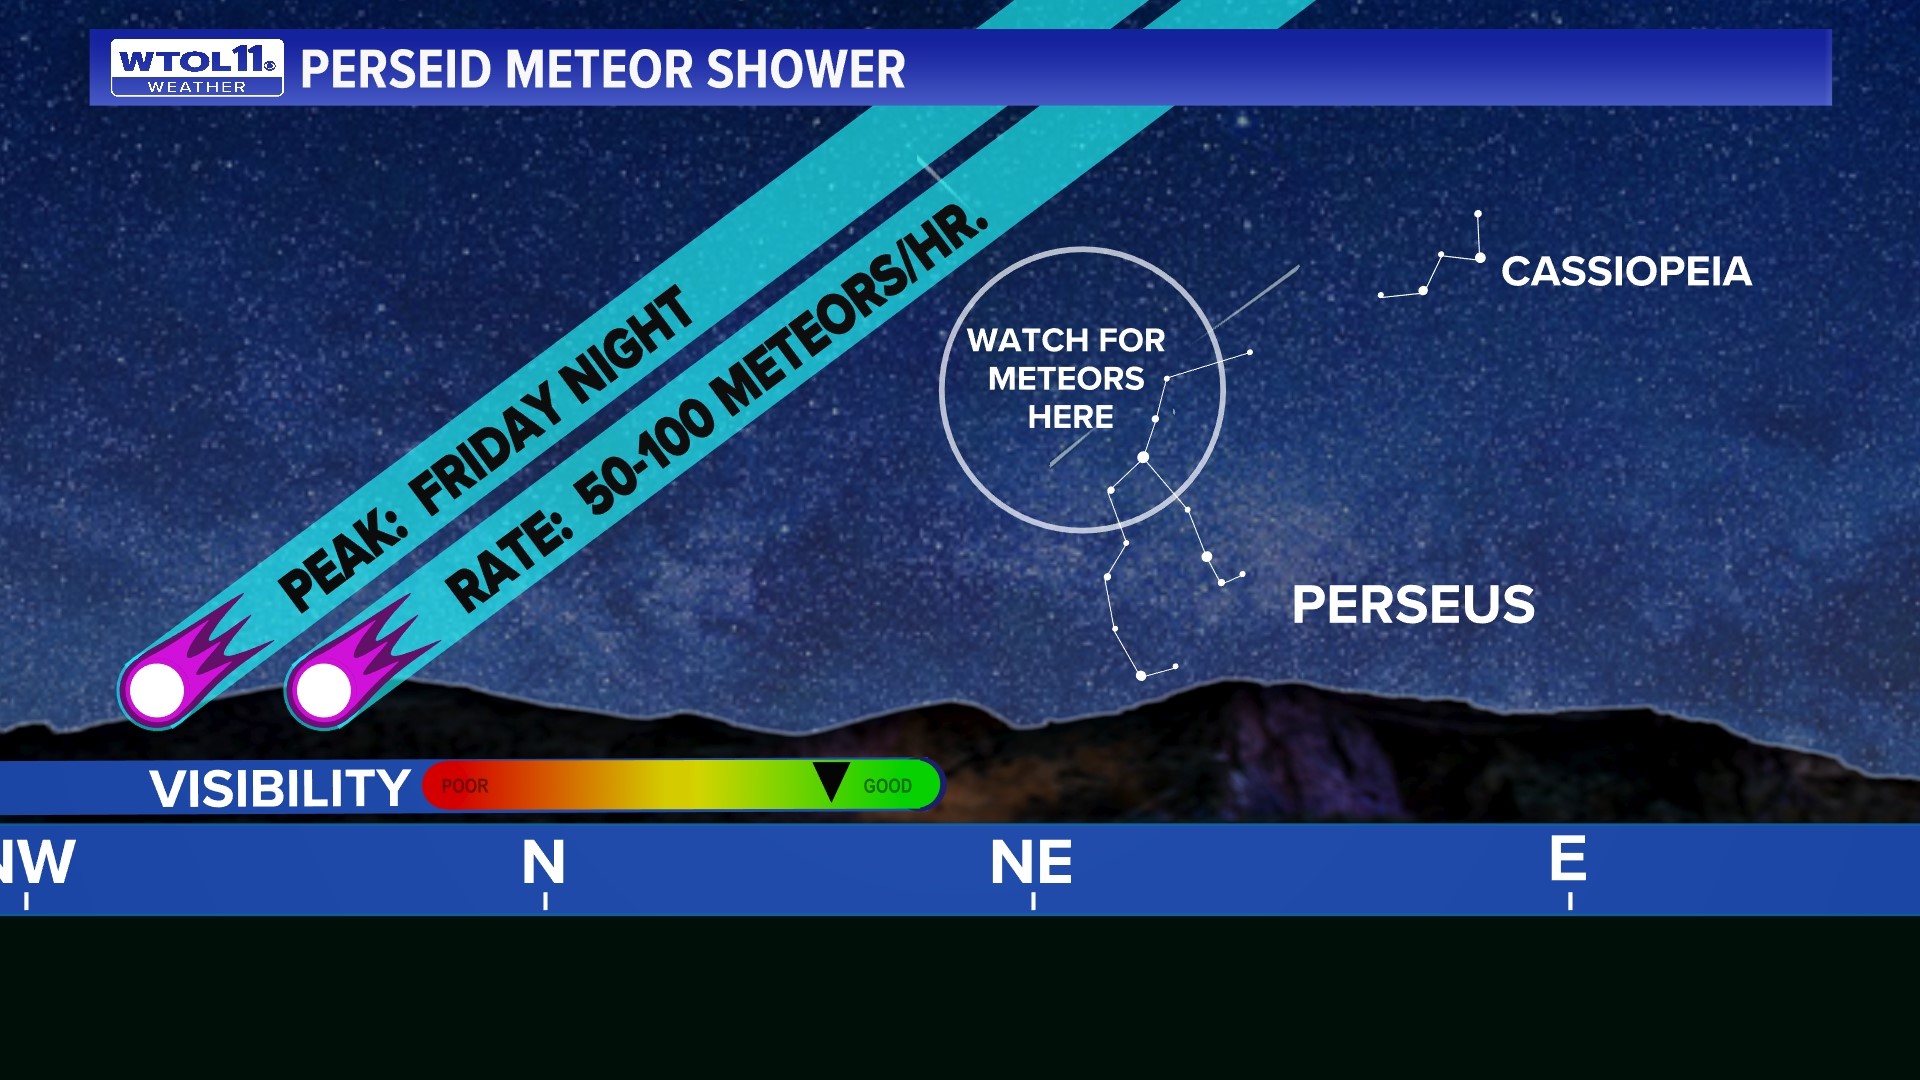 How to view the Perseid Meteor Shower